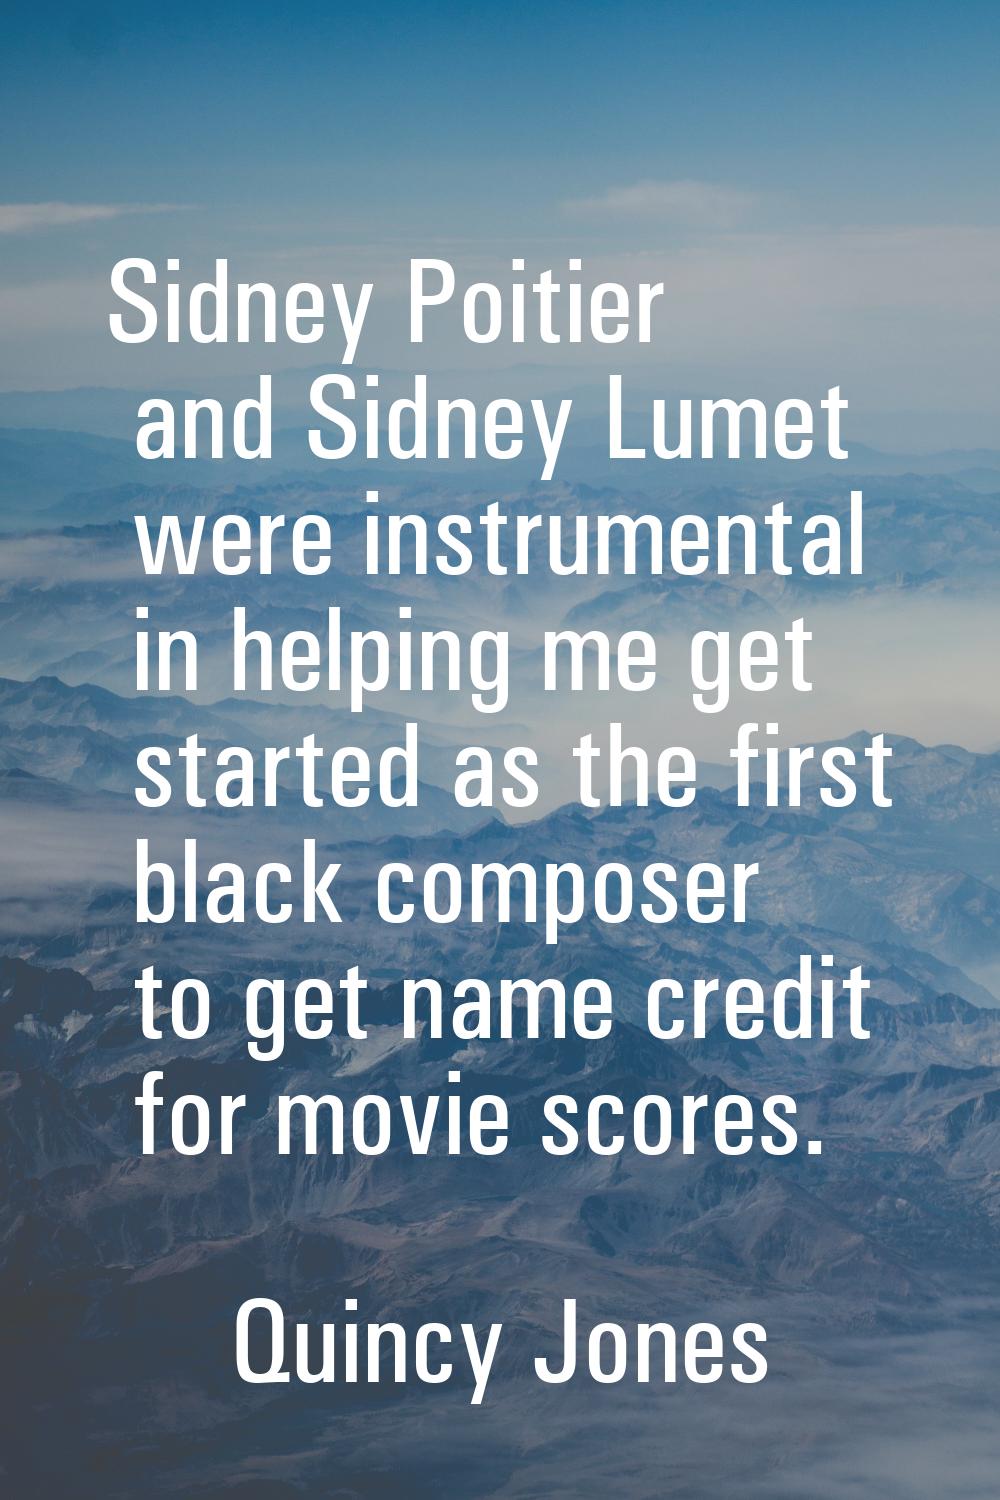 Sidney Poitier and Sidney Lumet were instrumental in helping me get started as the first black comp